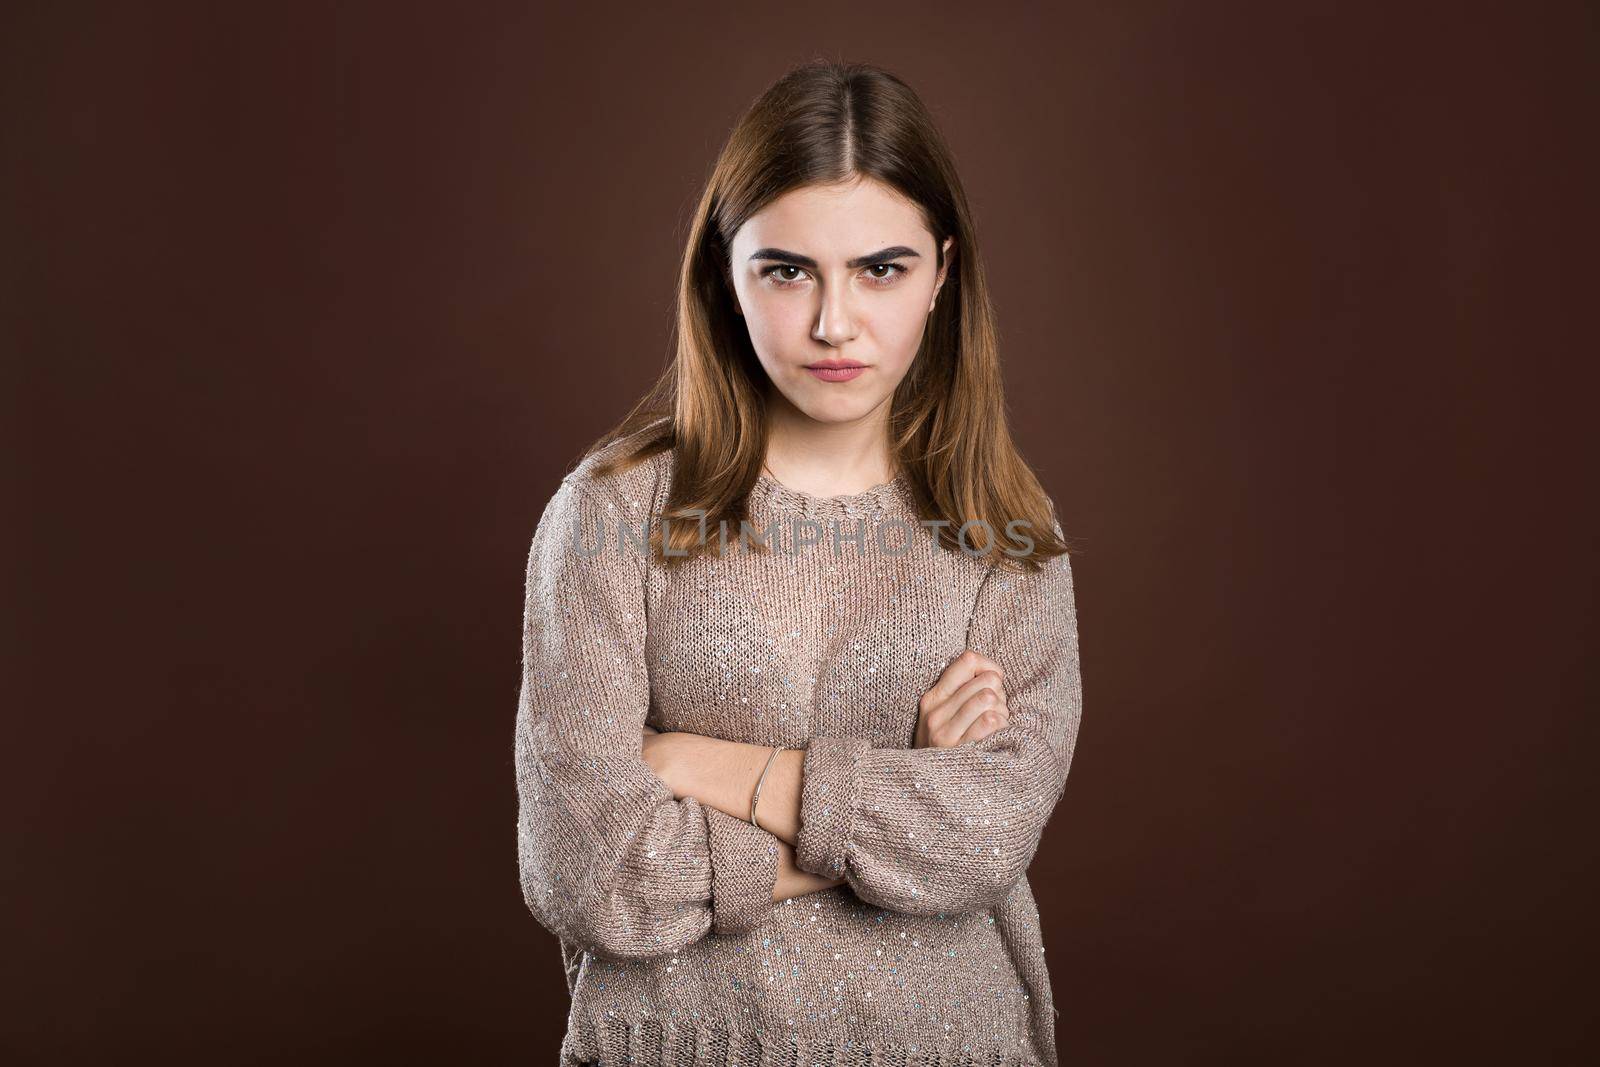 Portrait of beautiful girl frowning her face in displeasure, wearing loose long-sleeved sweater, keeping arms folded. Attractive young woman in closed posture by StudioPeace